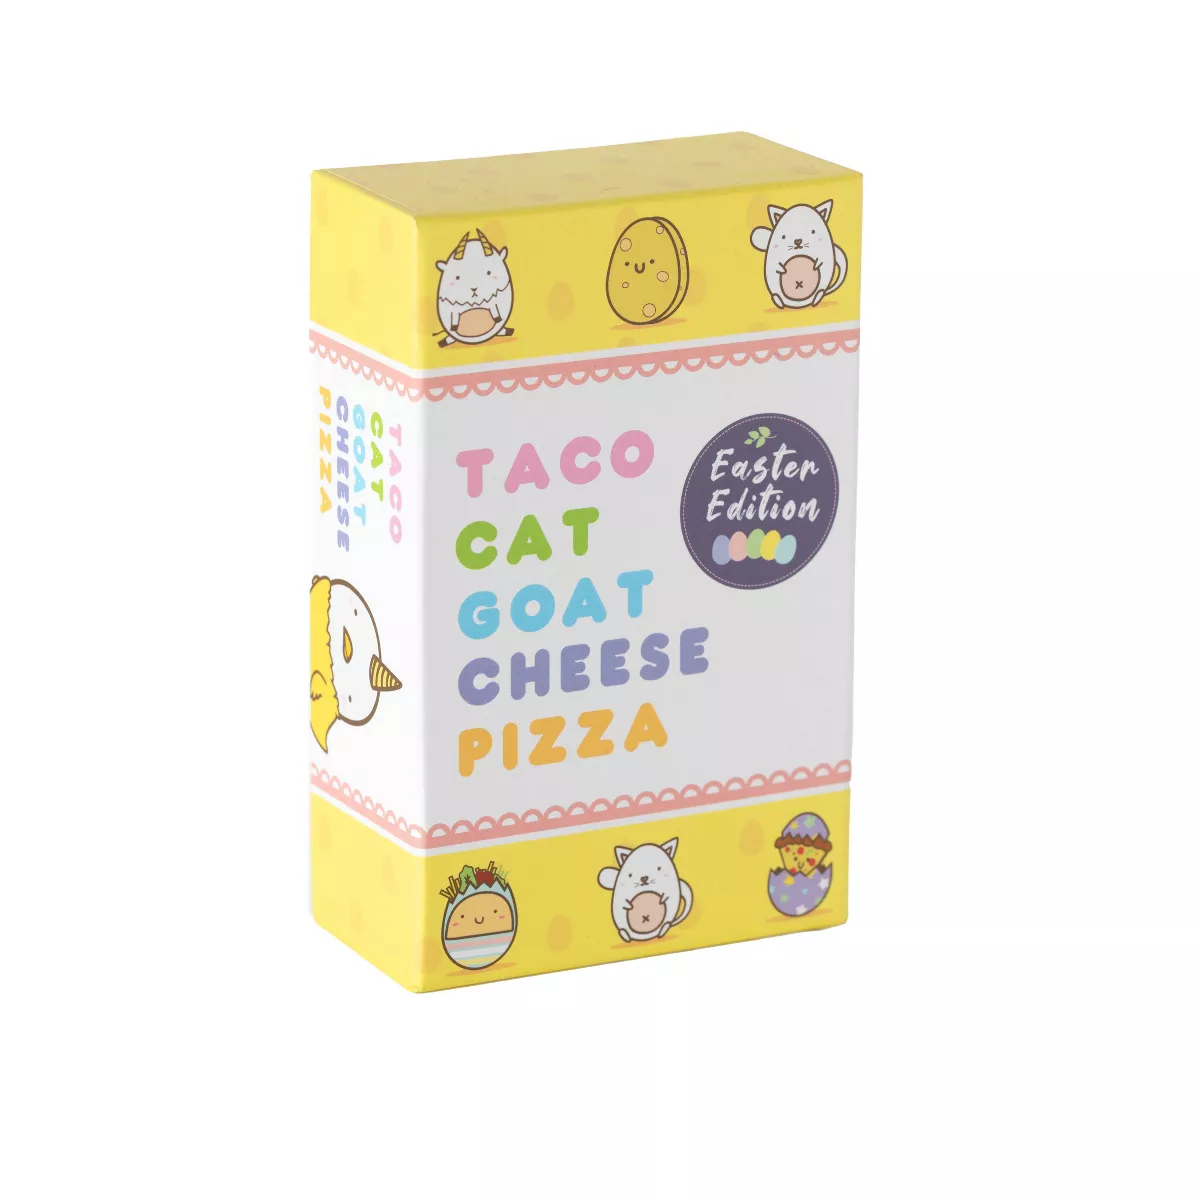 Taco Cat Goat Cheese Pizza - Easter Edition